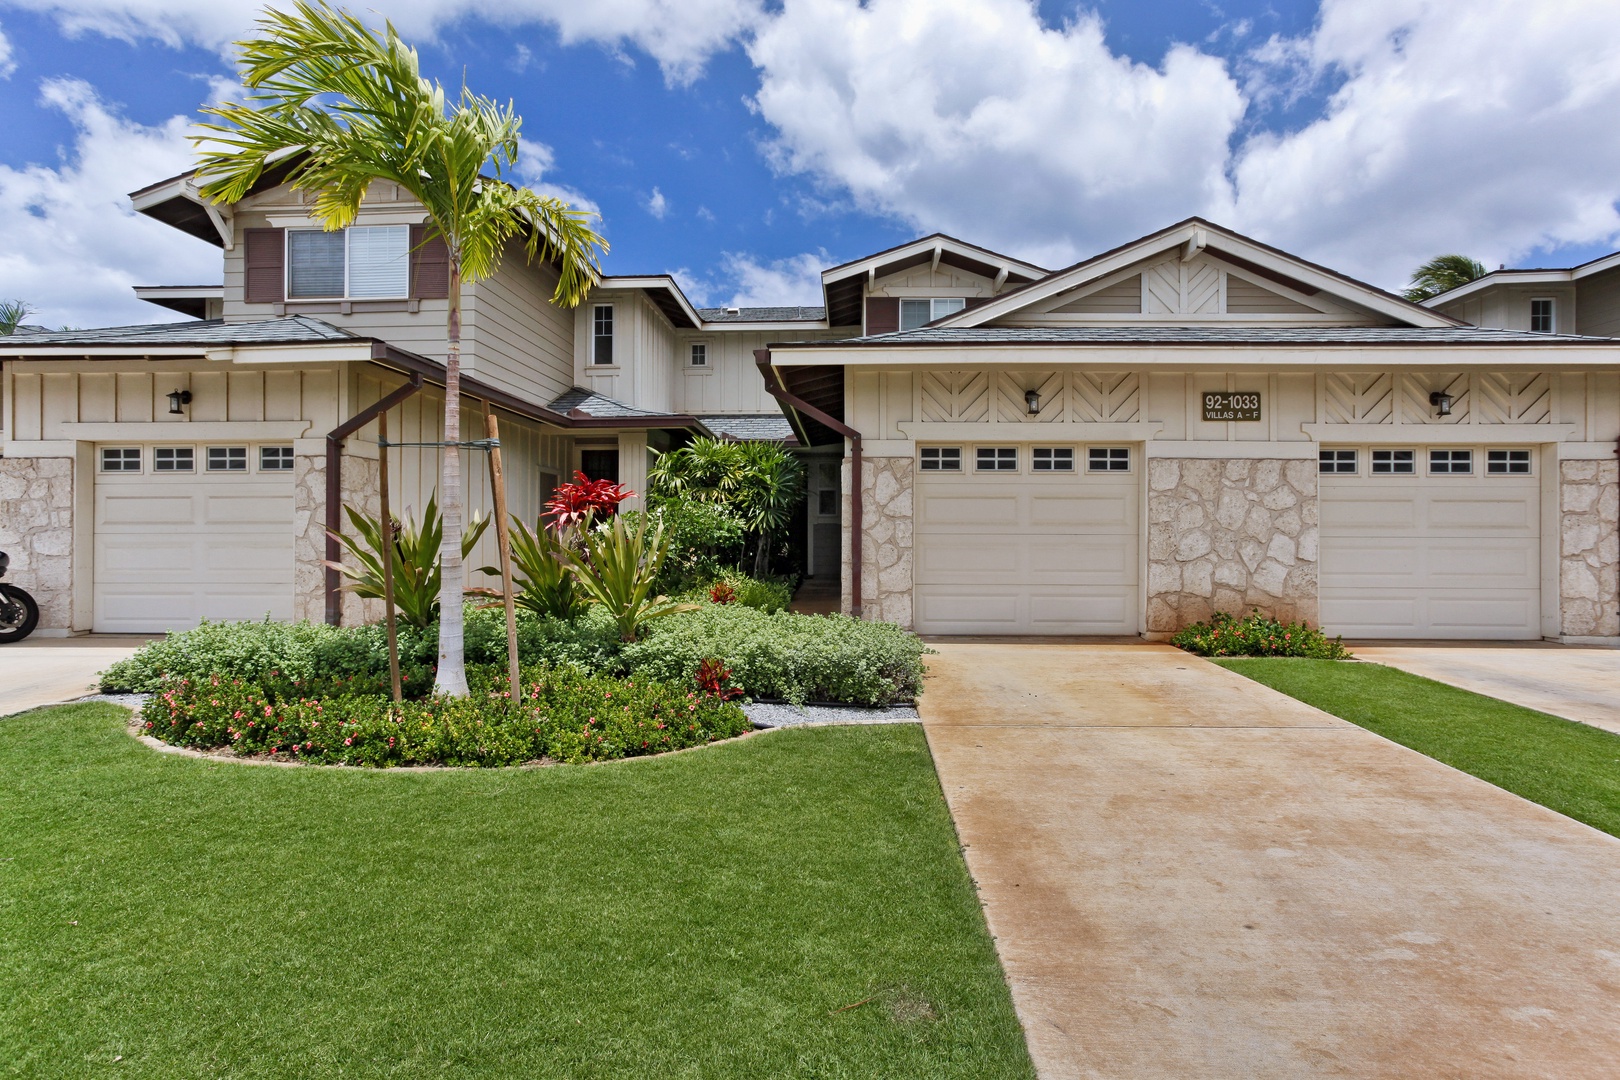 Kapolei Vacation Rentals, Ko Olina Kai 1033C - The paved drive and garage at your home away from home.